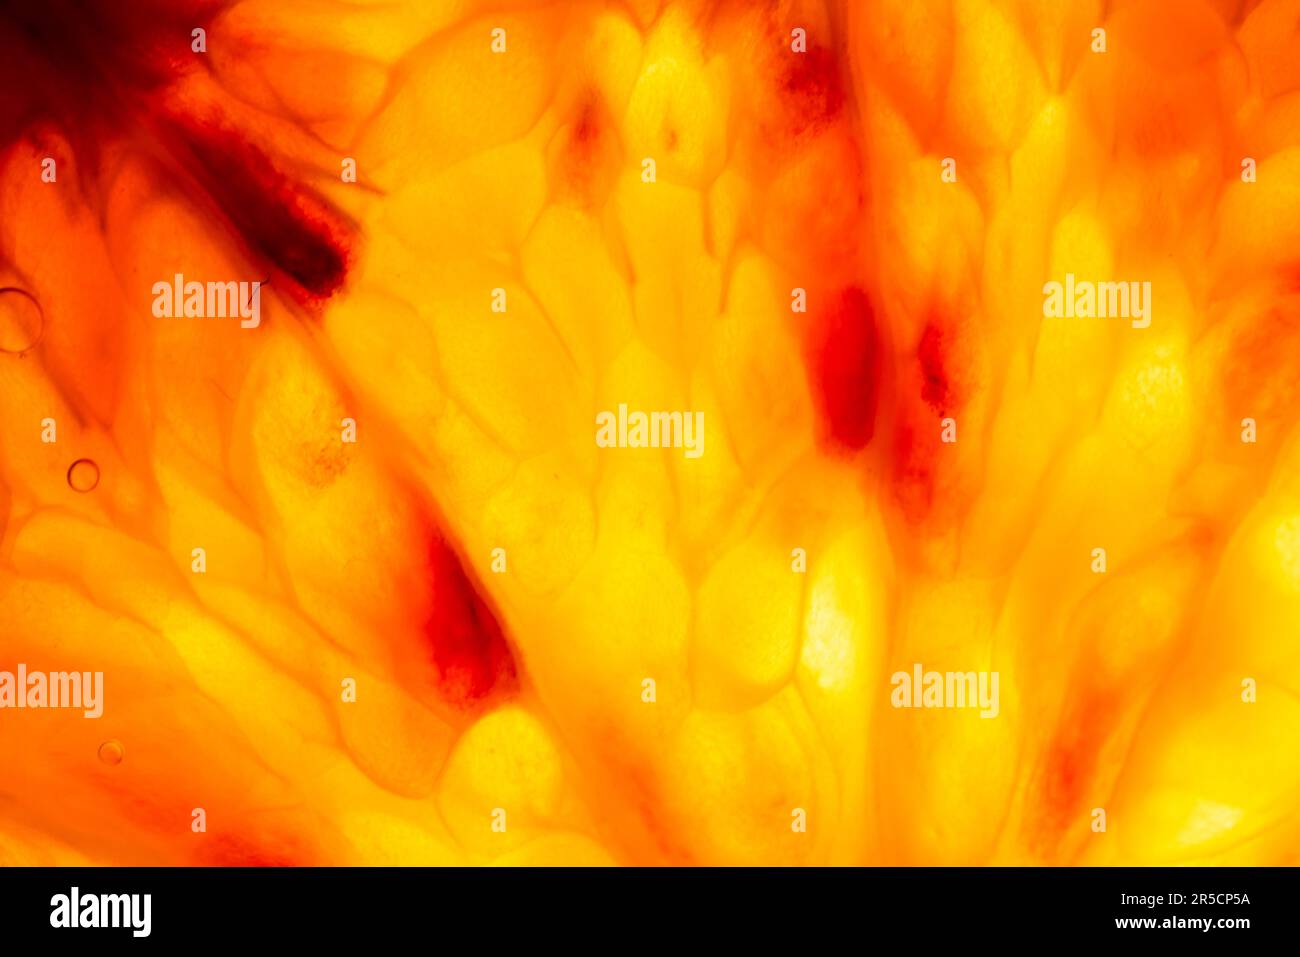 A captivating macro shot of a Sicilian orange slice, illuminated from below, revealing its vibrant orange color with hints of mesmerizing red elements Stock Photo